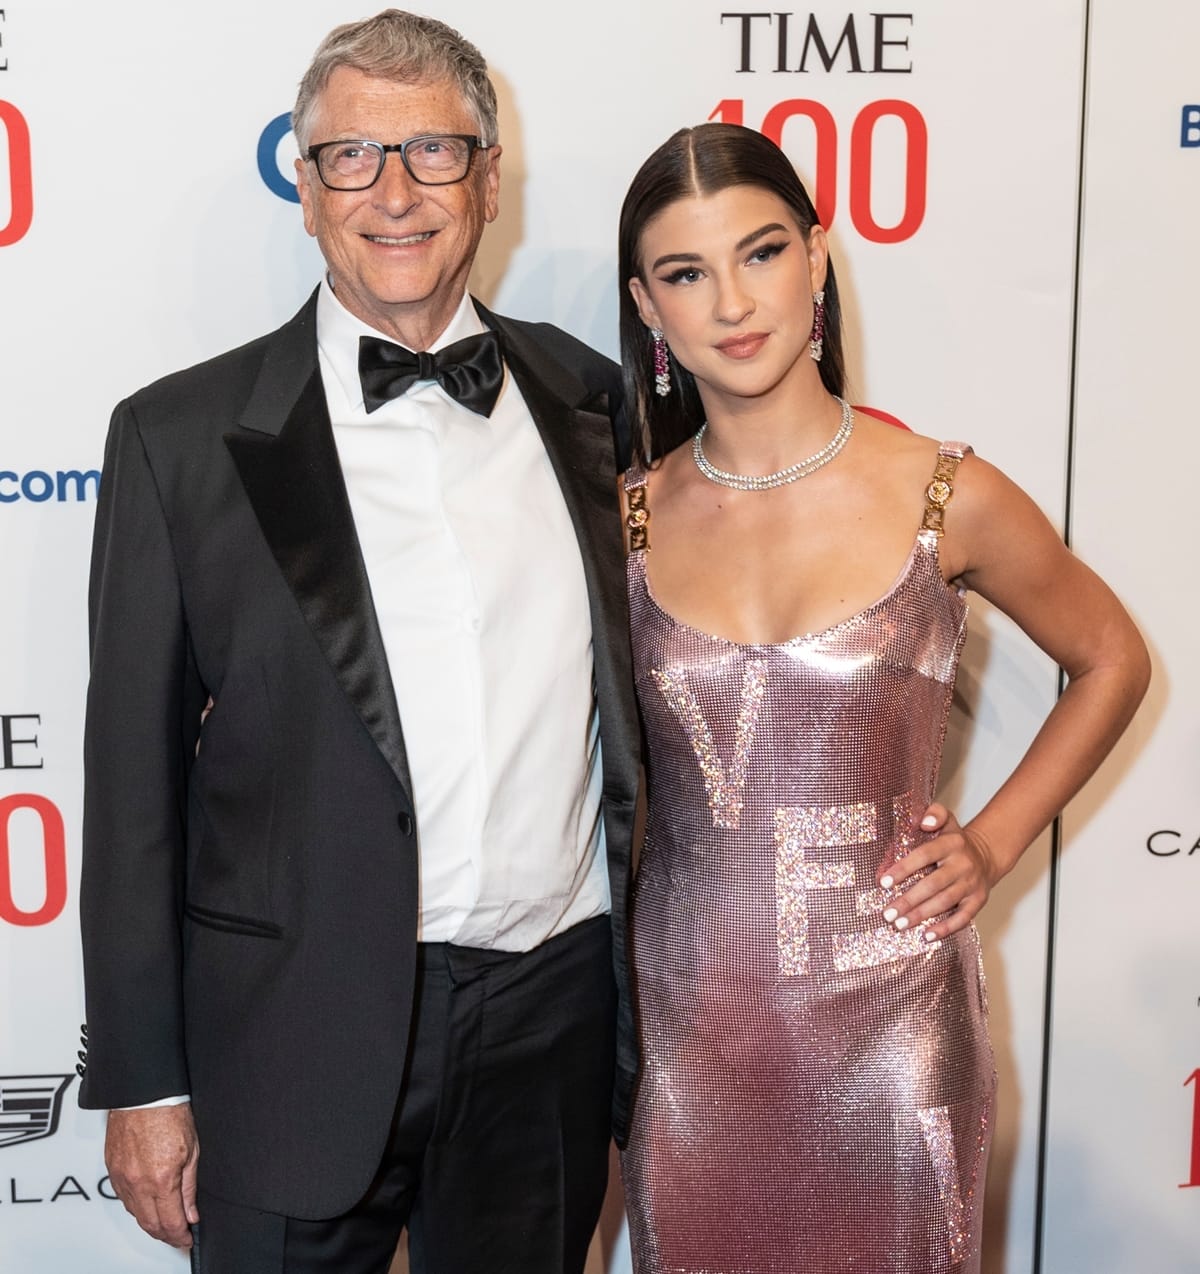 Phoebe Adele is the third child of billionaire Bill Gates and his wife Melinda Gates